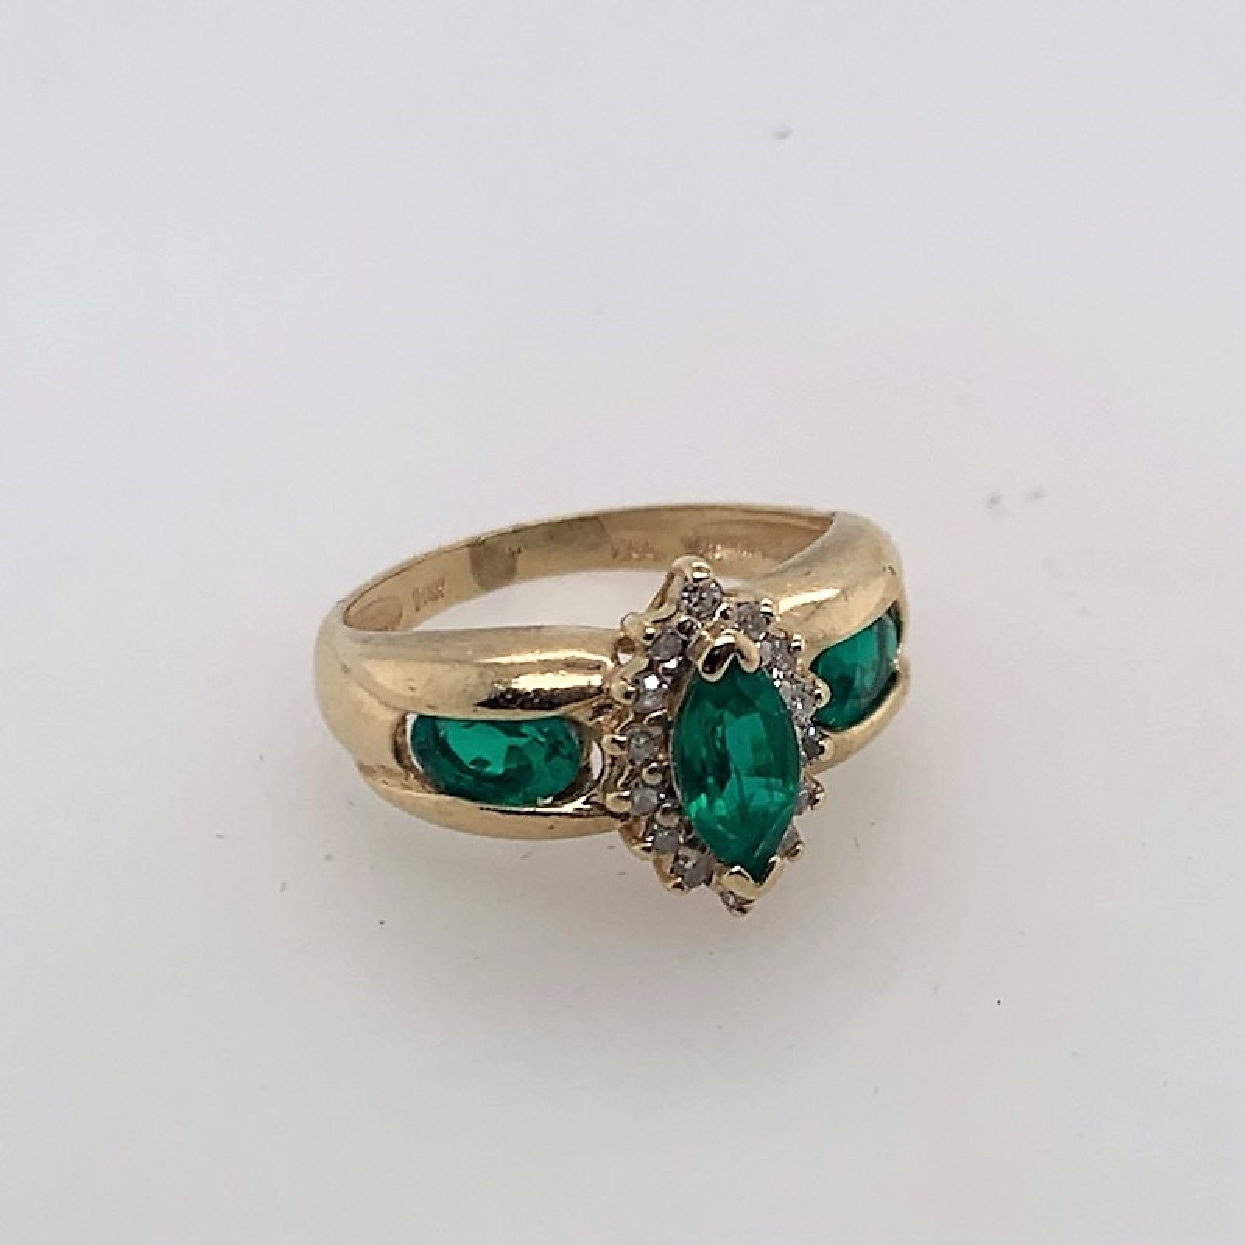 14K Yellow Gold Ring with Marquise Shaped Synthetic Emerald with Diamond Halo and Two Synthetic Emerald Accents; Size 6.25